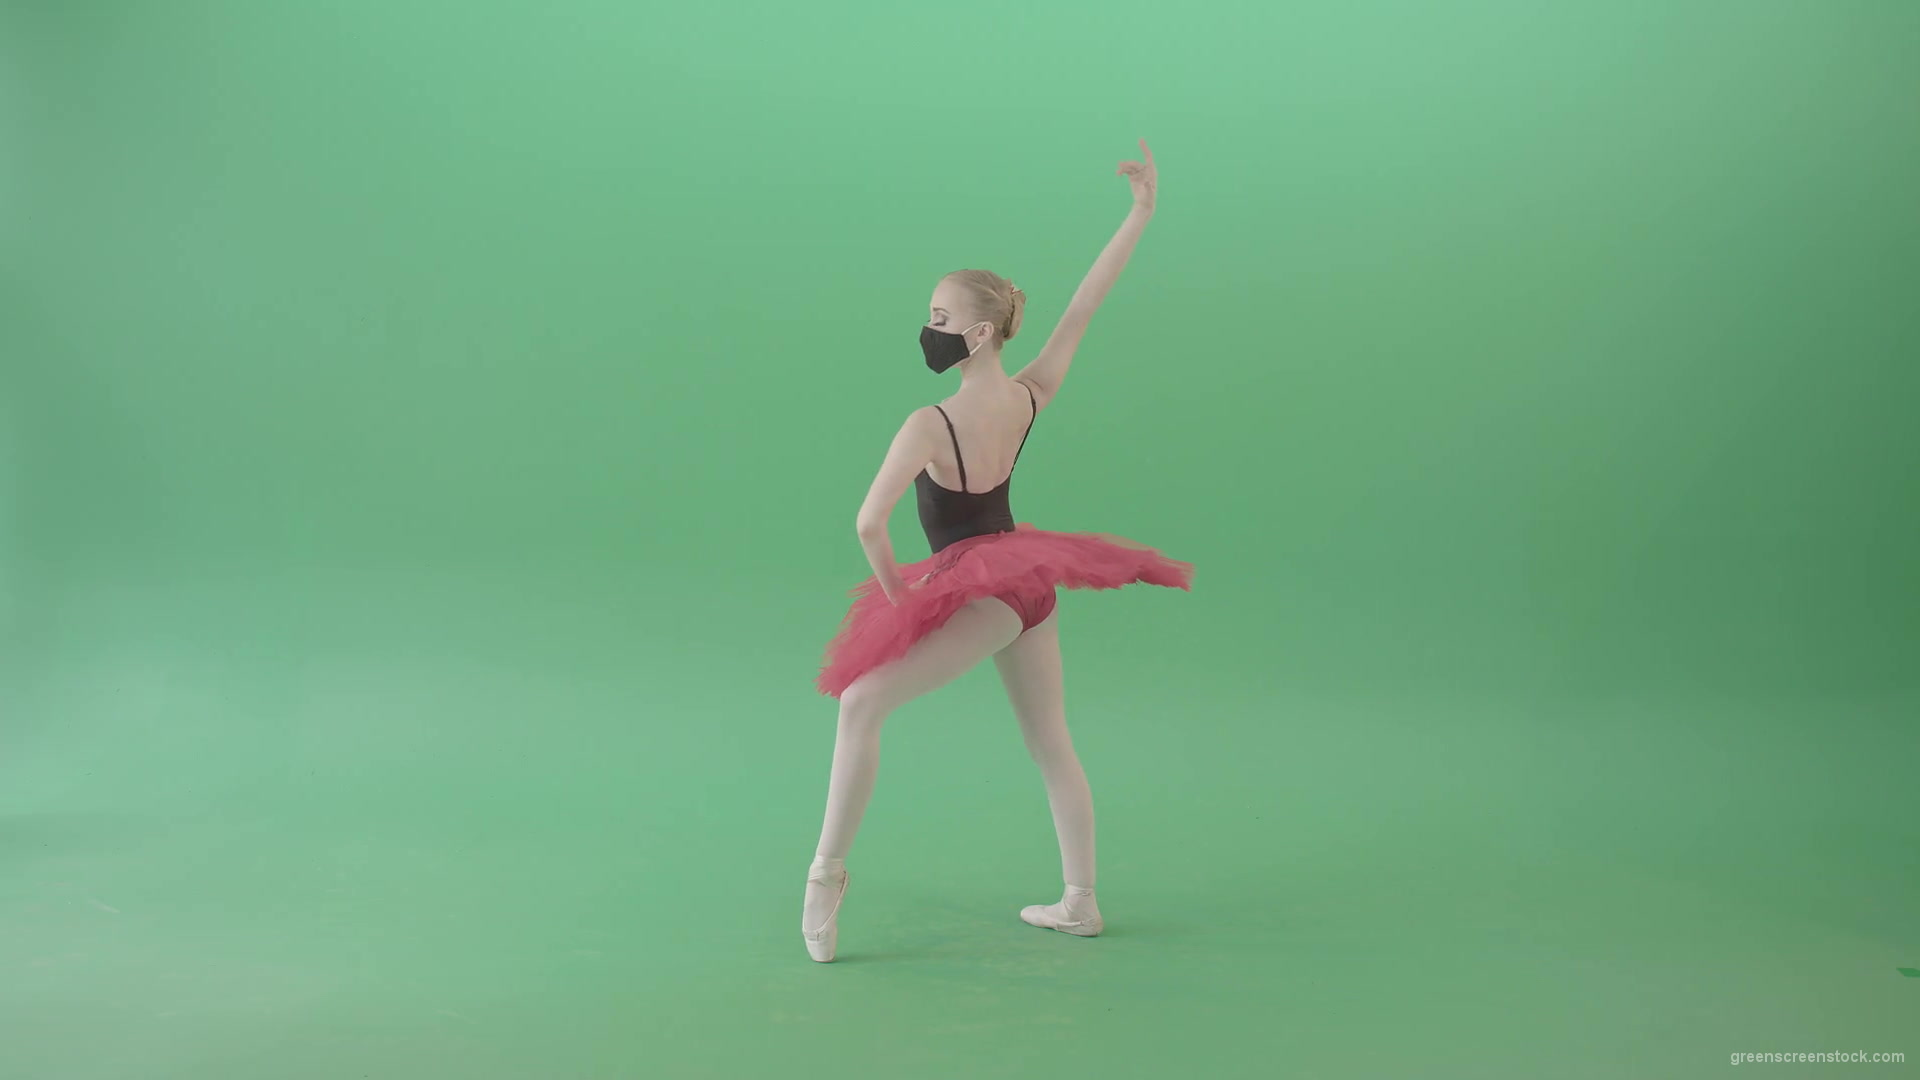 Tinny-Ballet-Dancing-Girl-Ballerina-in-red-black-dress-and-mask-welcome-people-for-awards-Green-Screen-Video-Footage-1920_004 Green Screen Stock